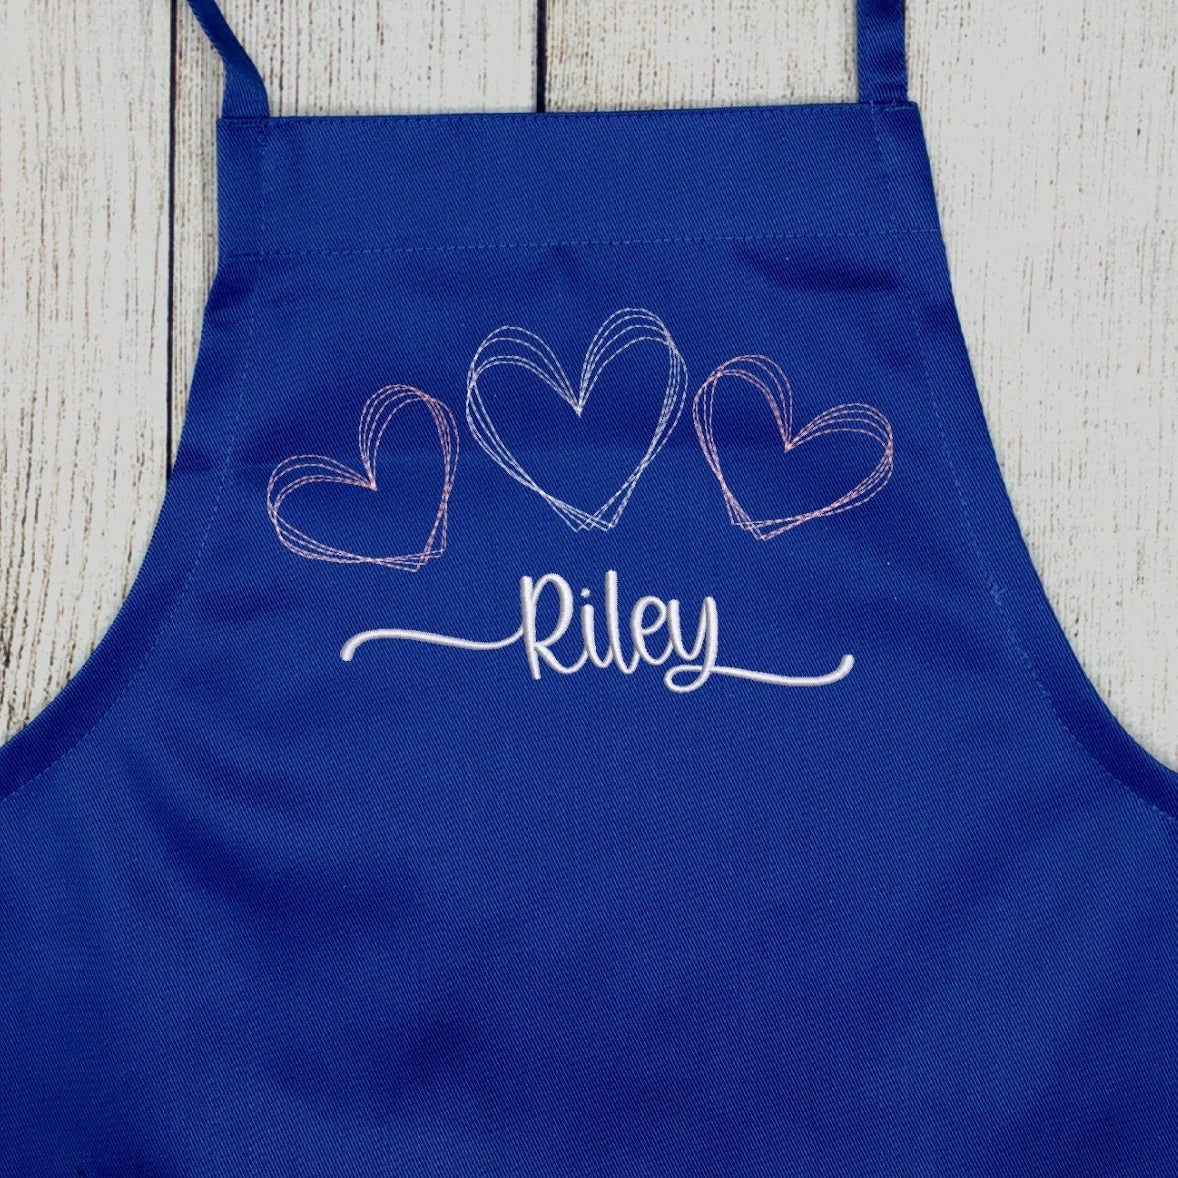 Blue apron for girls with hearts and name